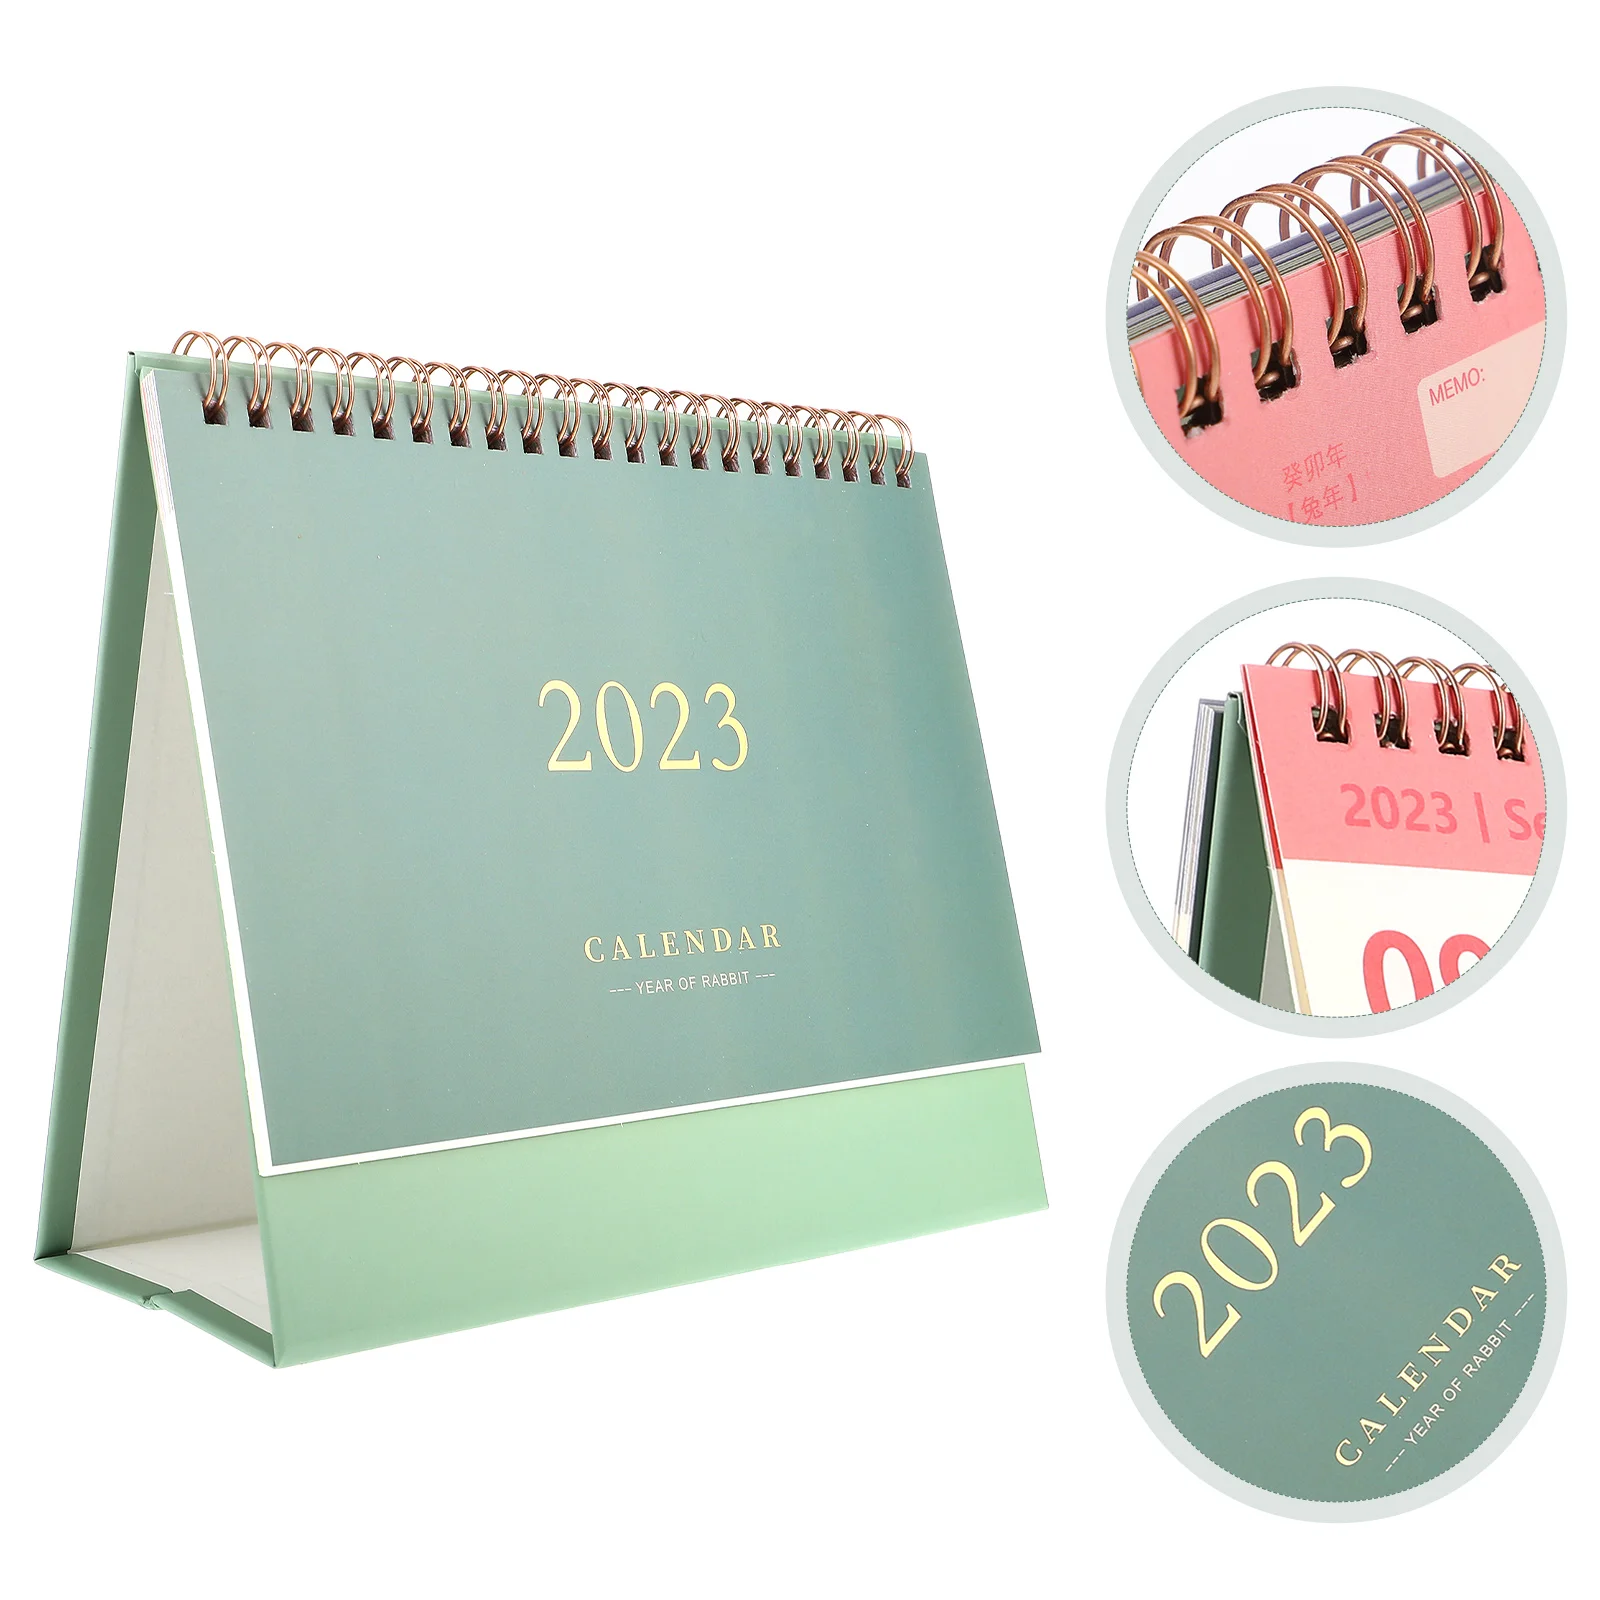 

Calendar Desk 2023 Desktop Small Standing Office Monthly Tableplanner Schedule Month Daily Wall Mini Decorative Standcalendars